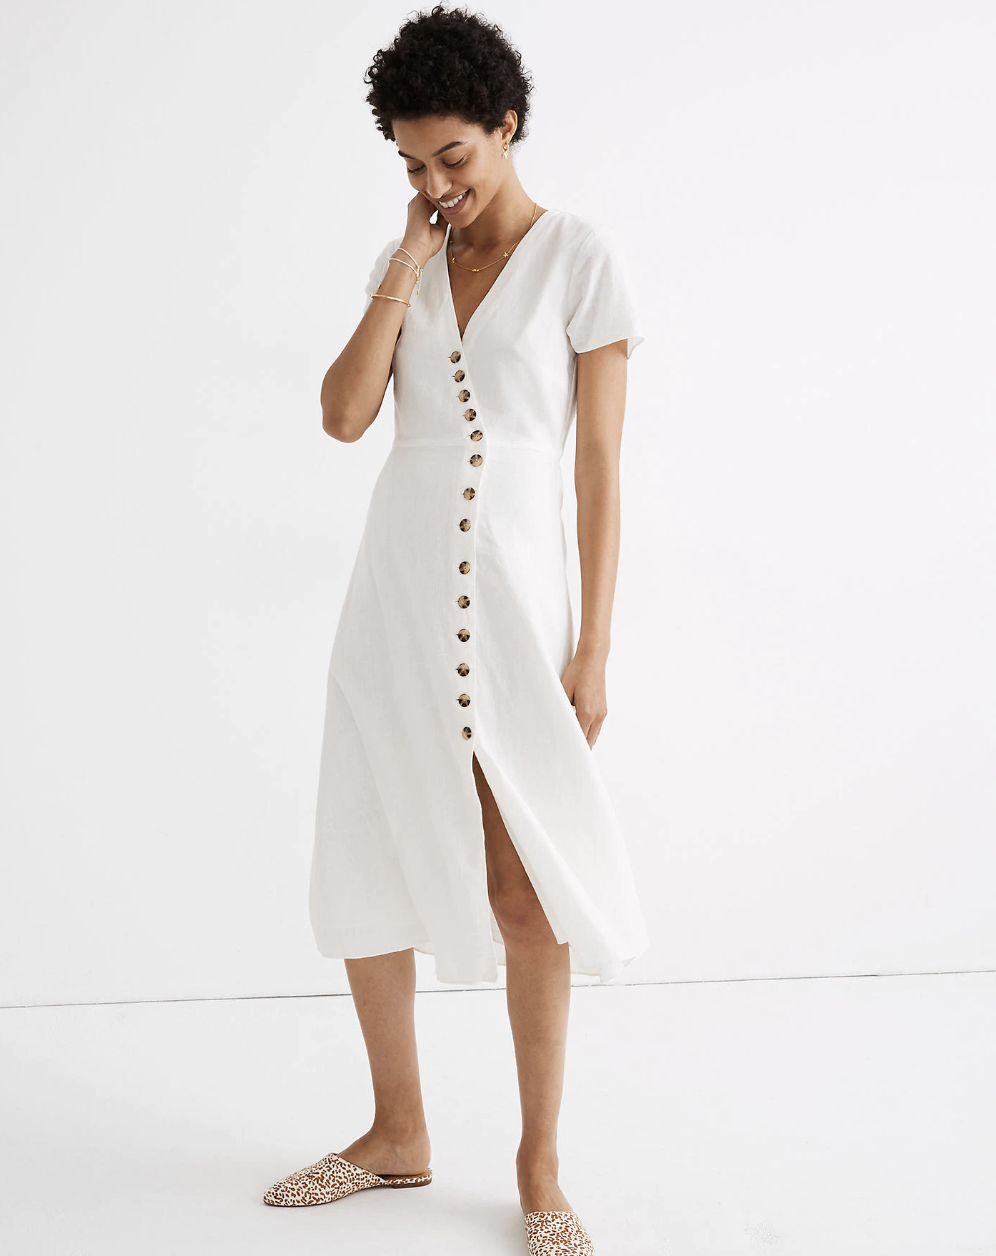 A model in a white linen dress that falls just below the knee, has short sleeves and a v-neck, and buttons all the way up through the v-neck